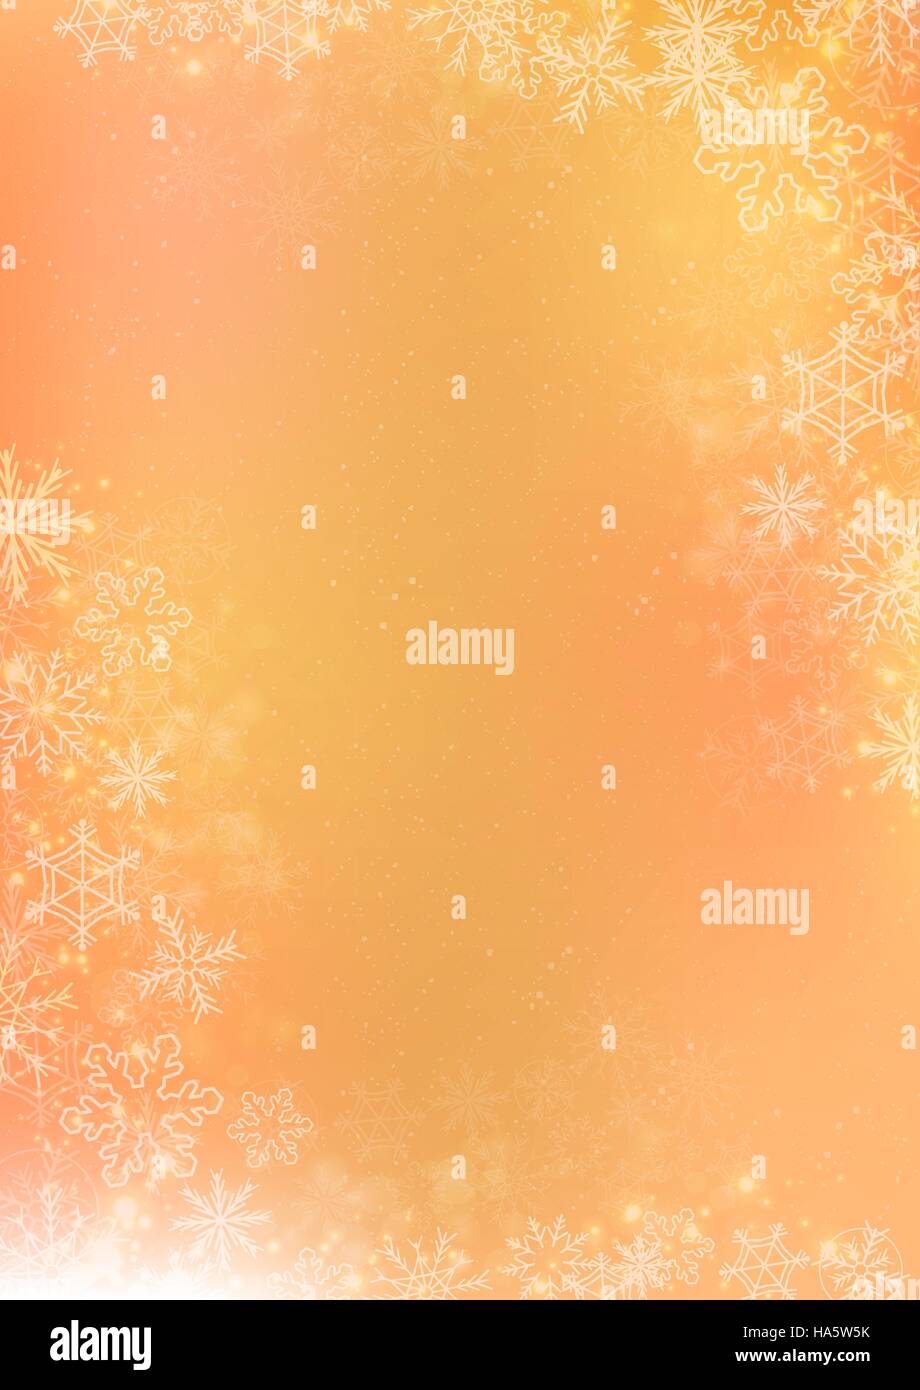 A3 orange gradient winter paper background with the snow and snowflake border Stock Vector